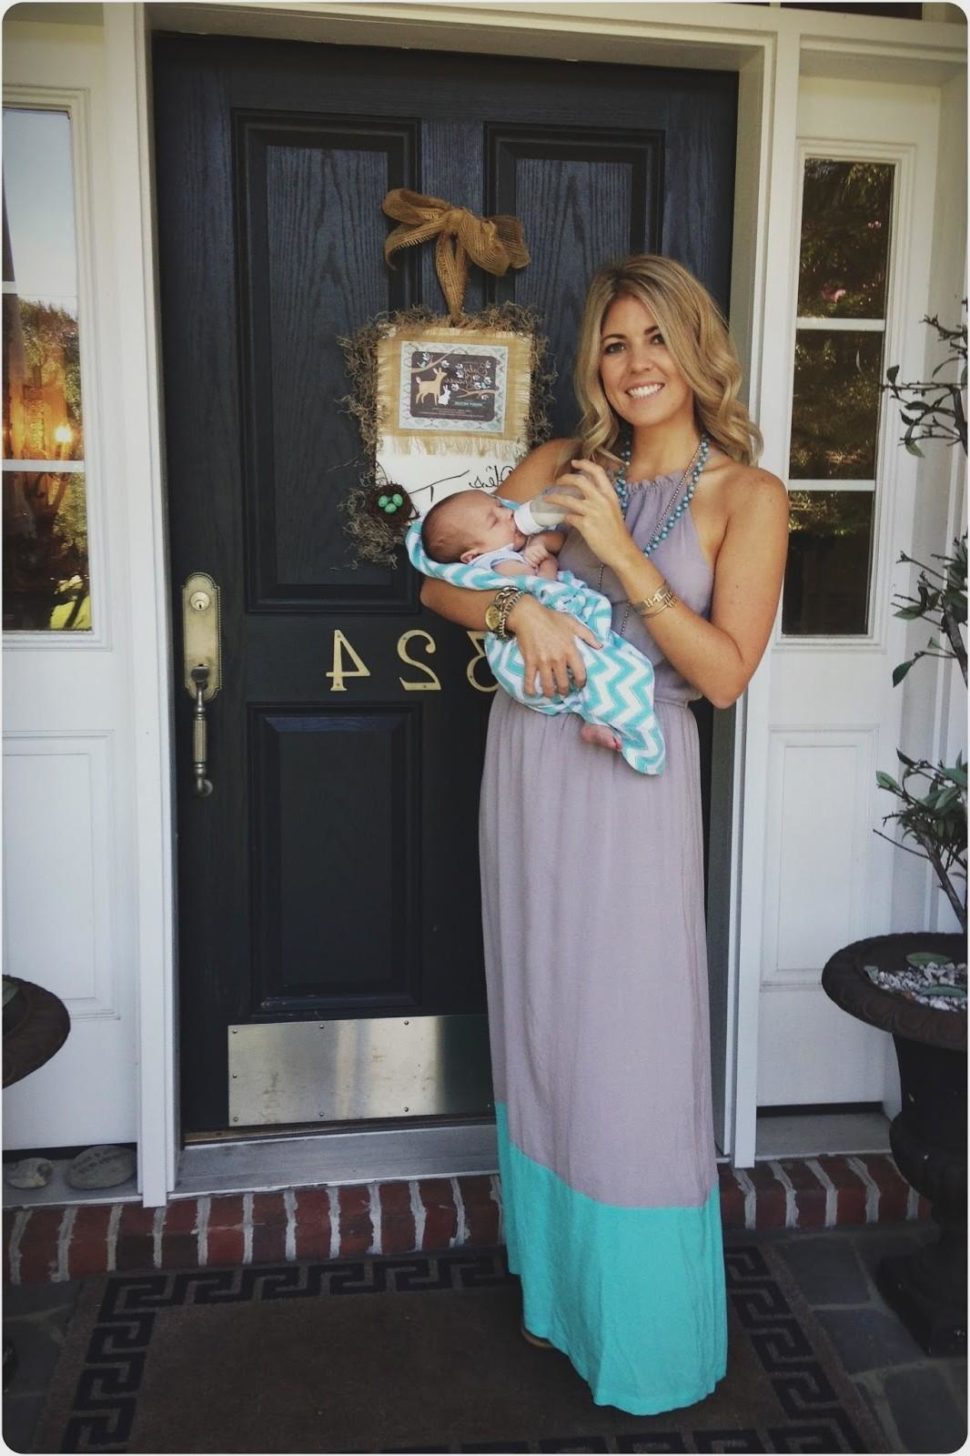 Medium Size of Baby Shower:maternity Boutique Cute Maternity Dresses For Baby Shower Affordable Maternity Dresses For Baby Shower What To Wear To My Baby Shower Best Maternity Dresses For Baby Shower Cheap Maternity Dresses For Baby Showers Celebrity Baby Shower Dresses Trendy Maternity Clothes